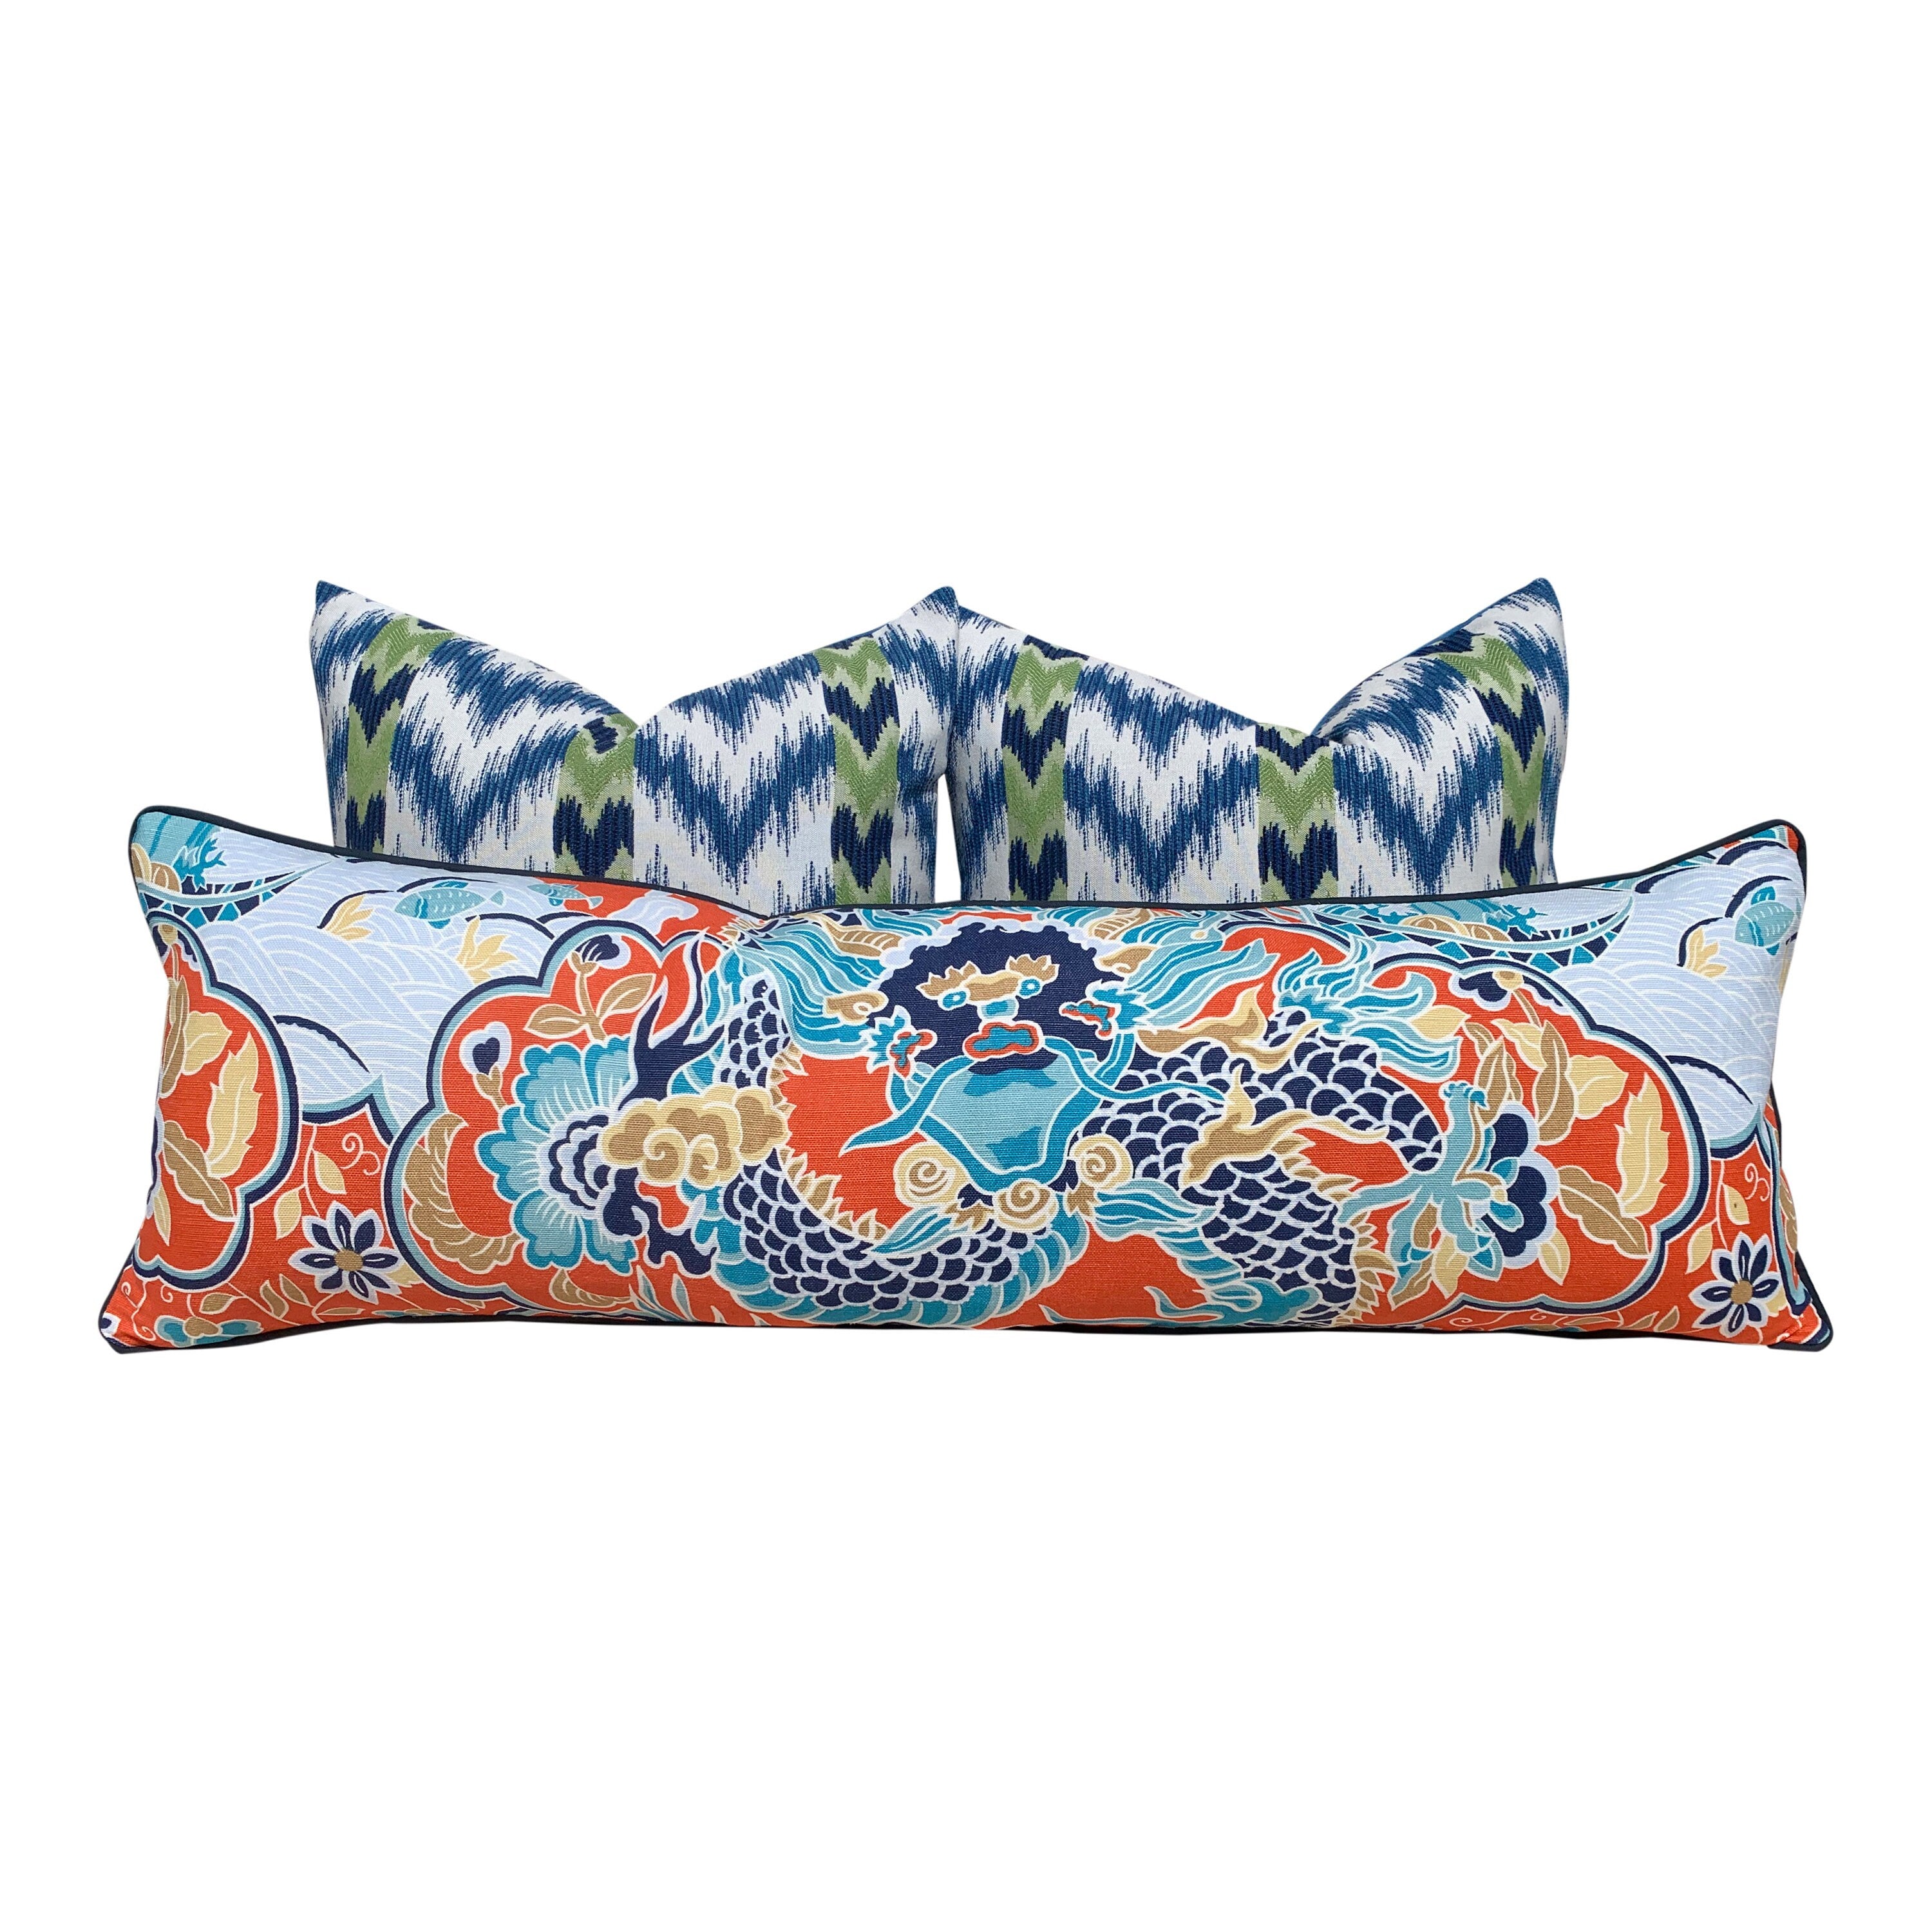 Thibaut Imperial Dragon Pillow in Orange and Turquoise. Decorative Lumbar Pillow